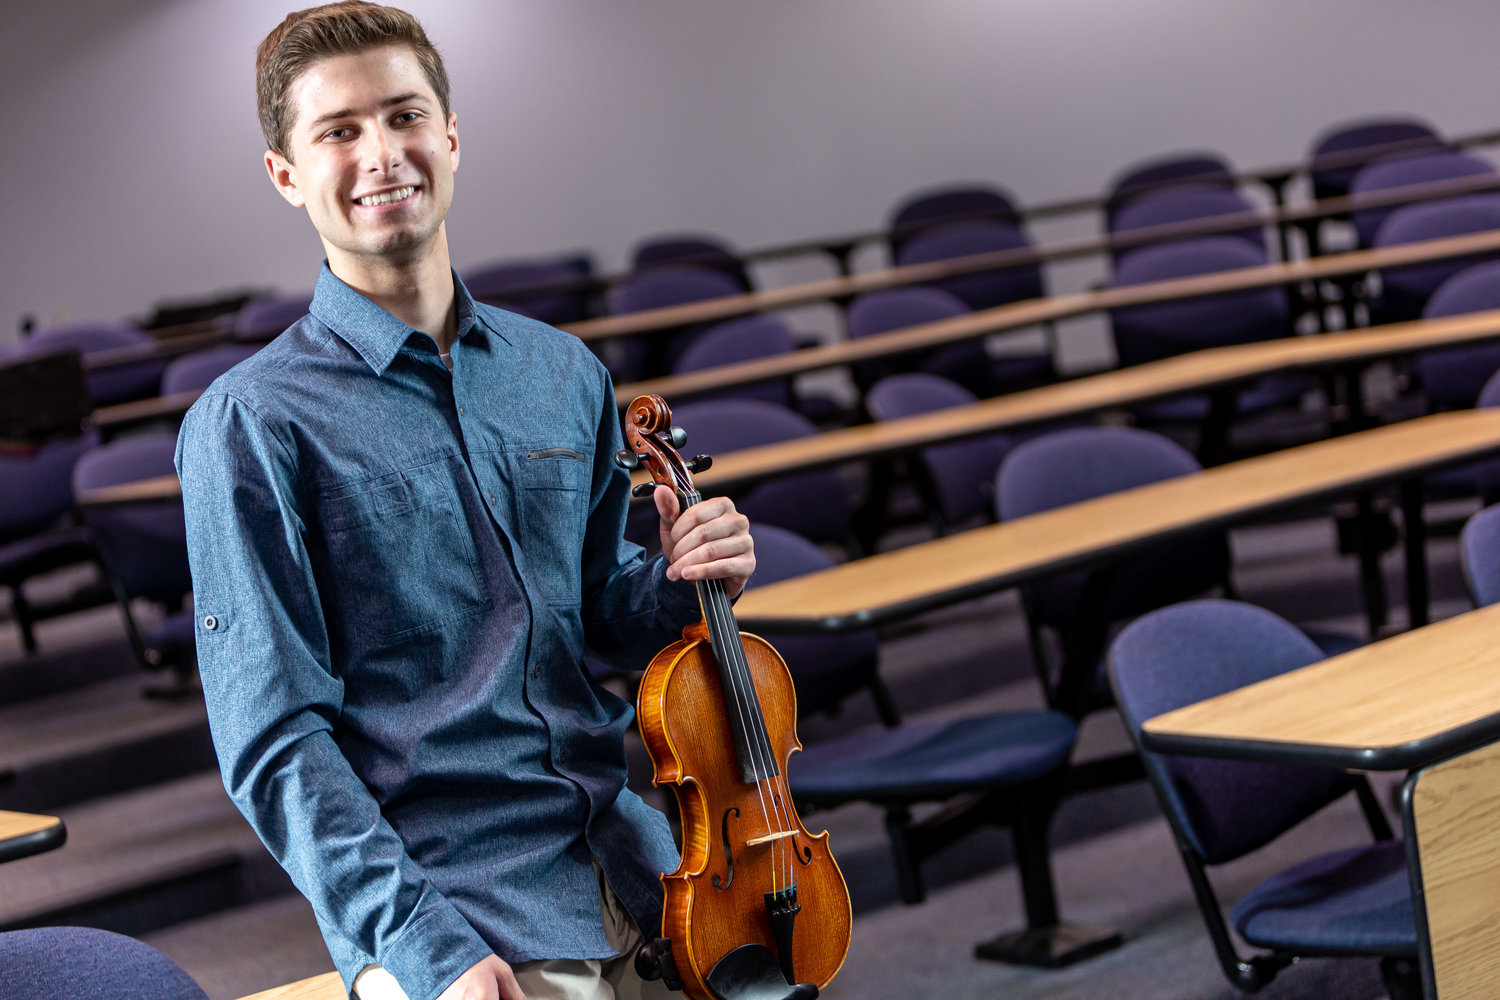 Jefferson Skinner will graduate from Cross Creek Early College High School this year. He served as the president of the student government. Outside school, he was the concertmaster and a soloist of the Fayetteville Symphony Youth Orchestra’s string and full orchestras.